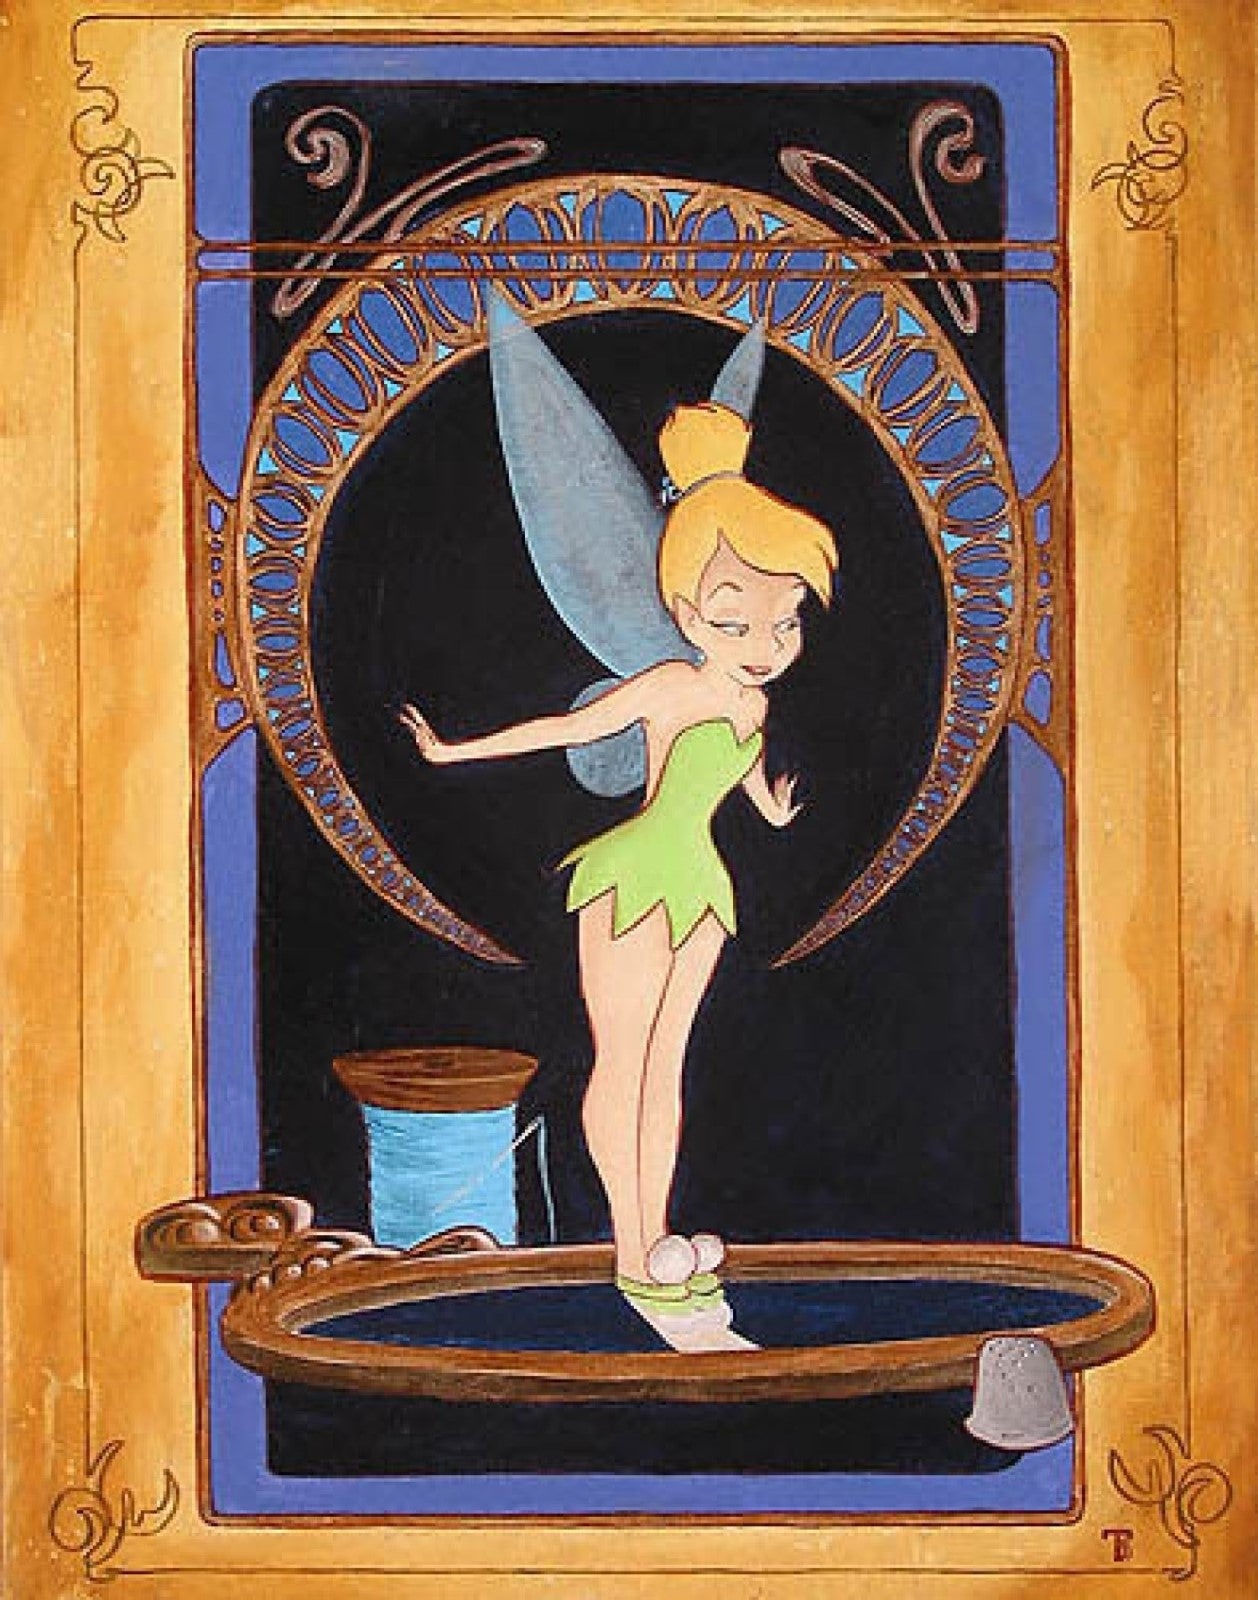 Tink's Reflection by Tricia Buchanan-Benson inspired by Peter Pan